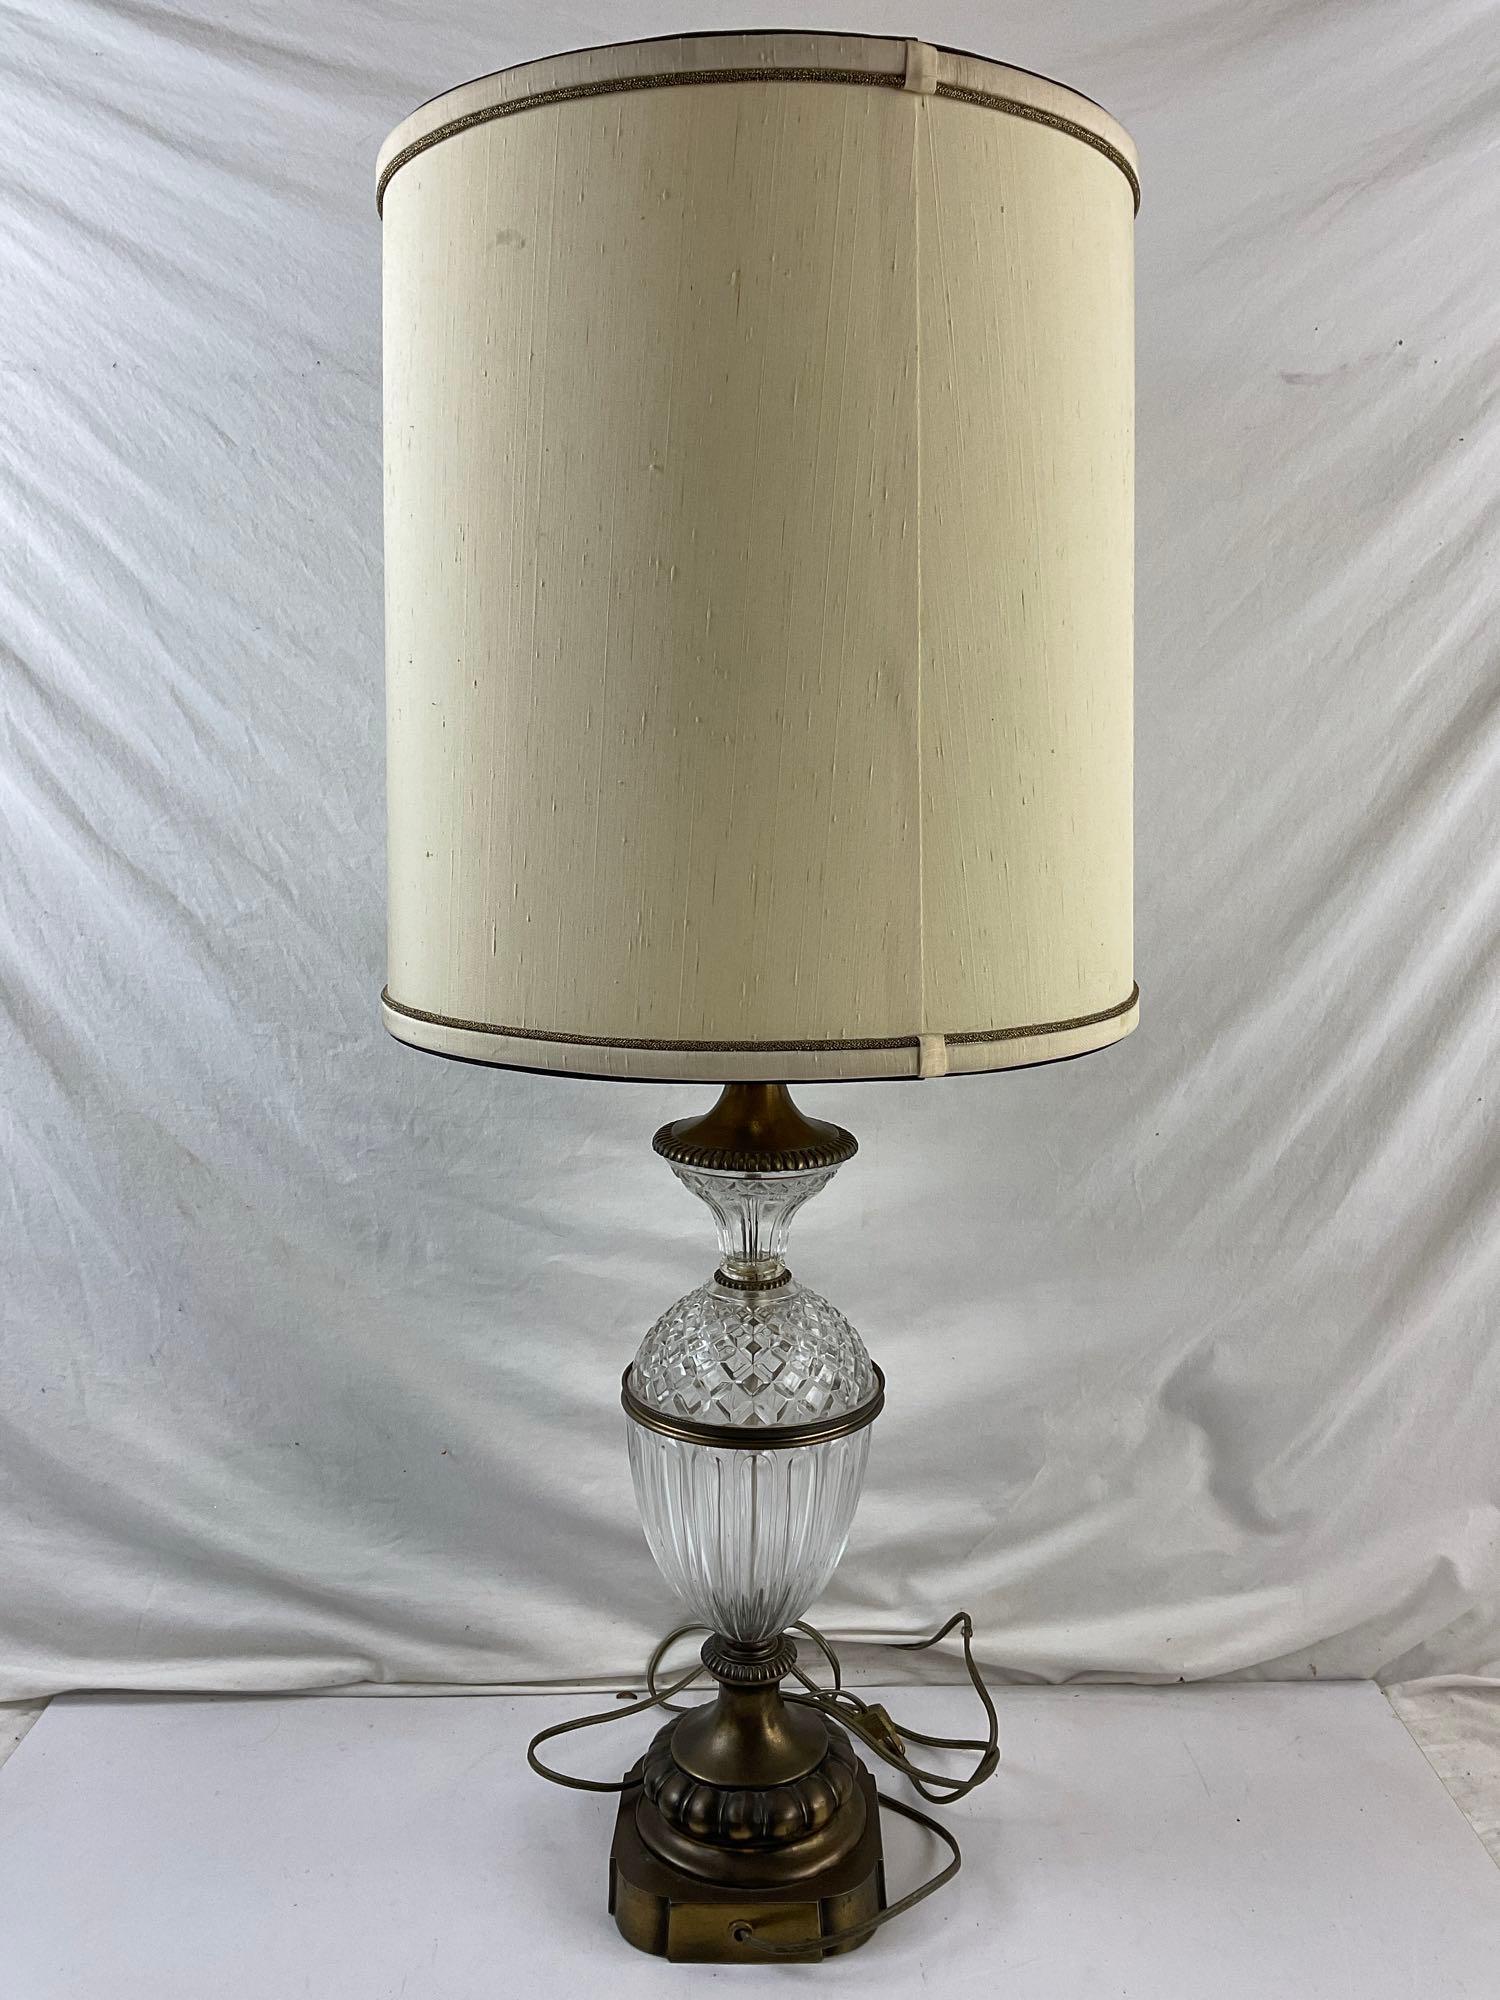 Vintage Glass & Brass Table Lamp w/ Cream Fabric Shade. Tested, Working. See pics.